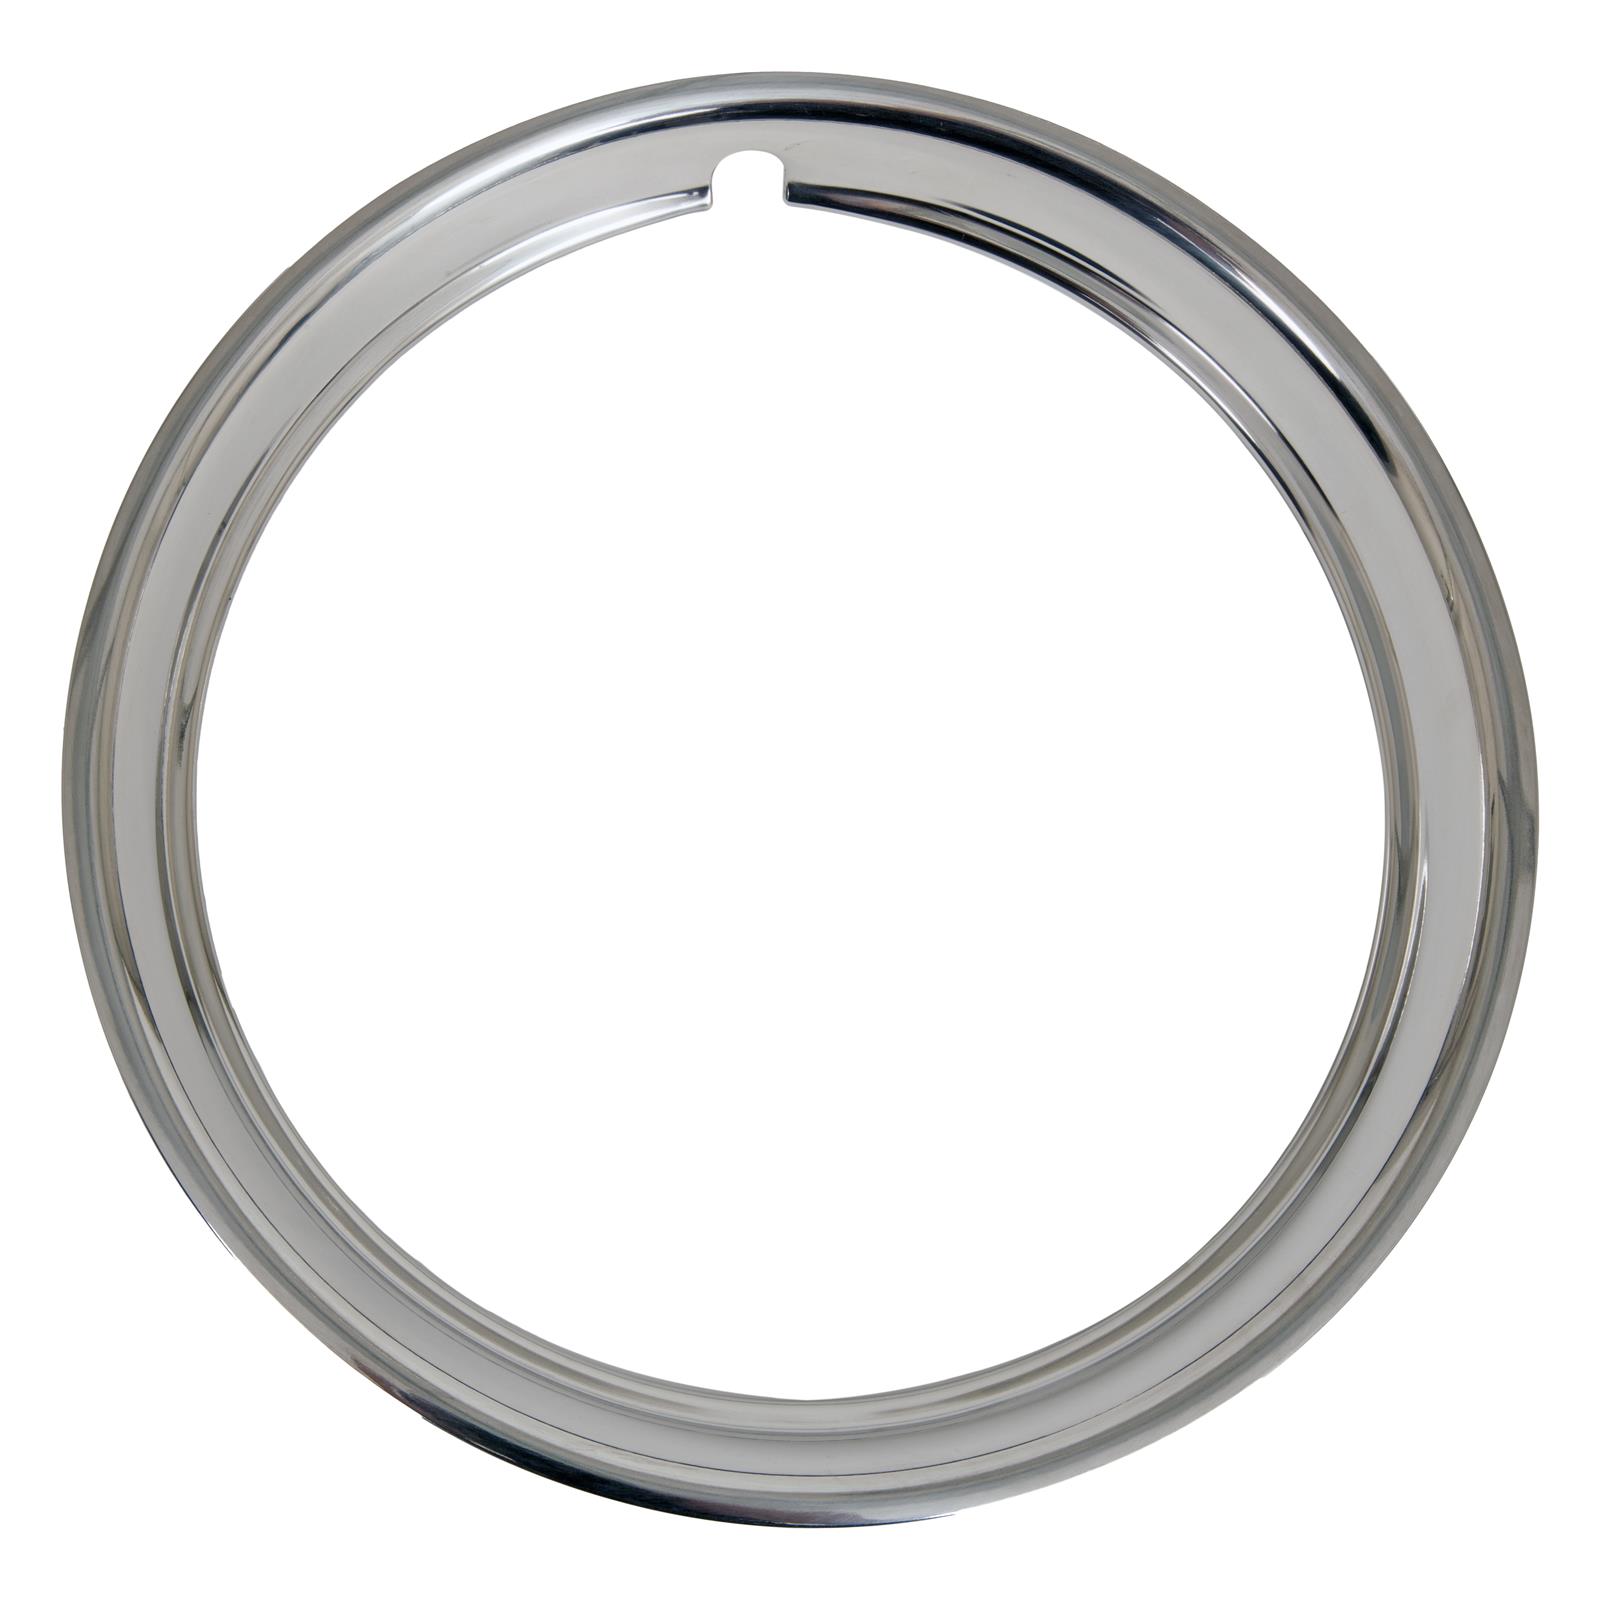 What are Trim Rings?